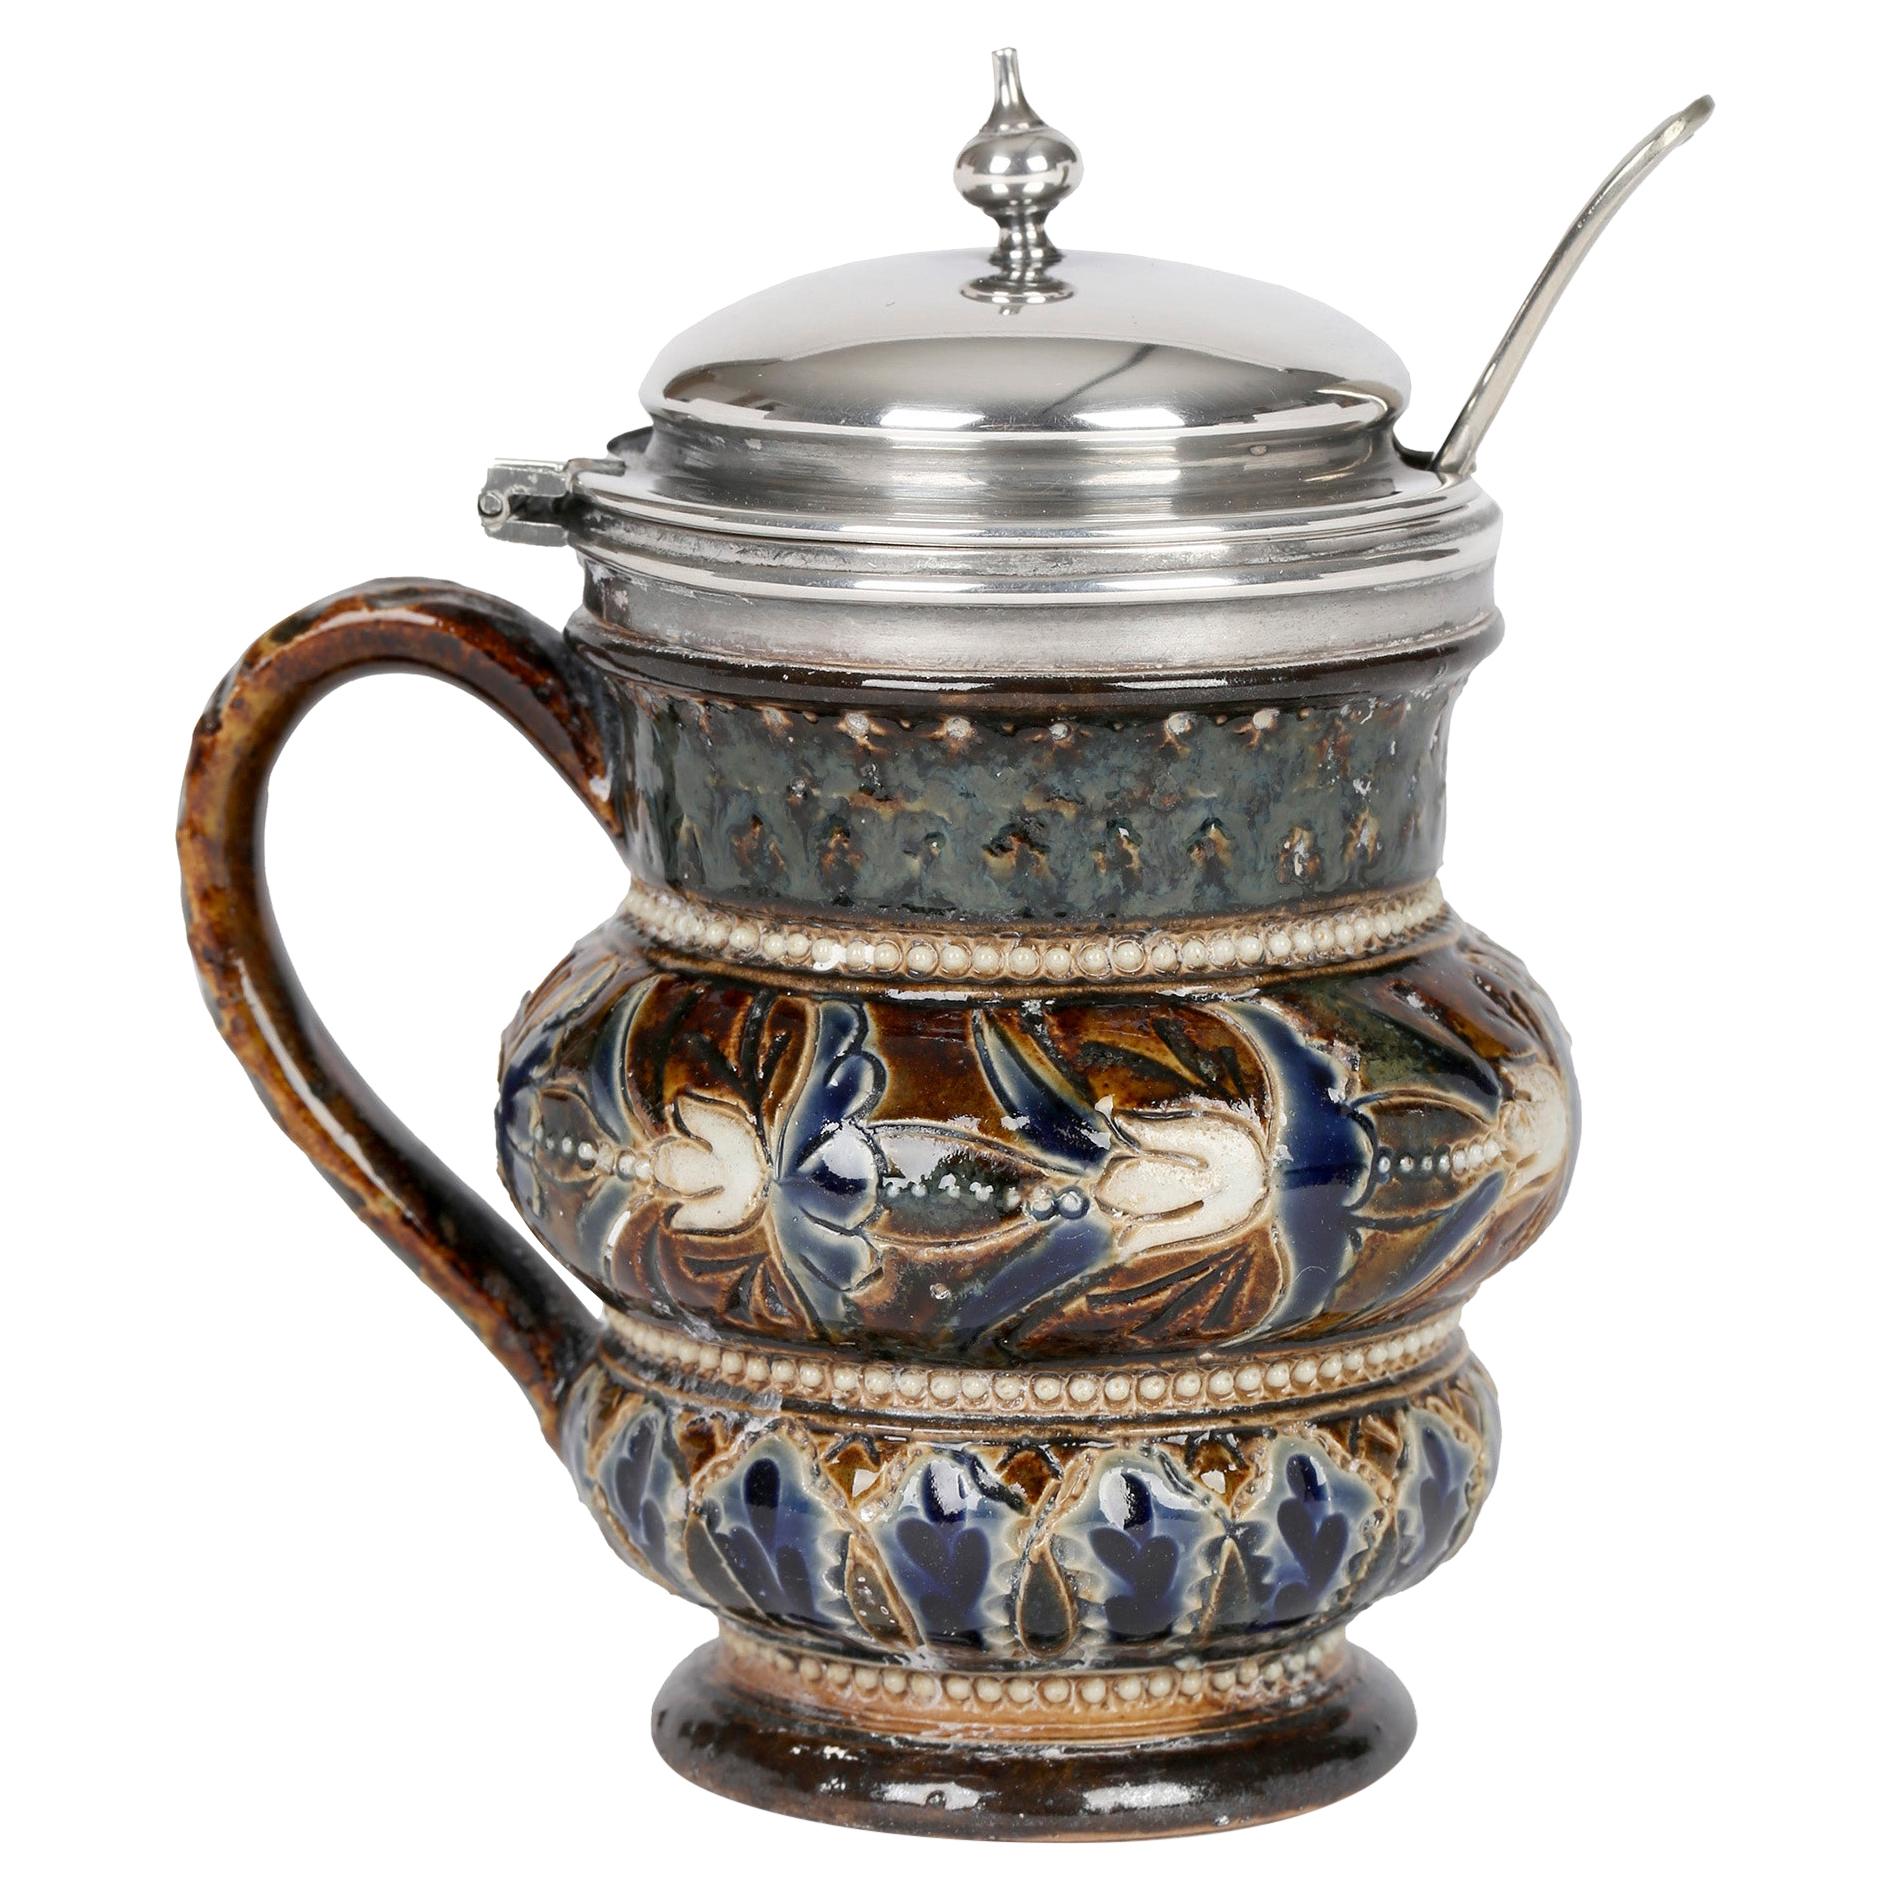 Doulton Lambeth Silver Plate Mounted Mustard Pot by Emily Partington, 1880